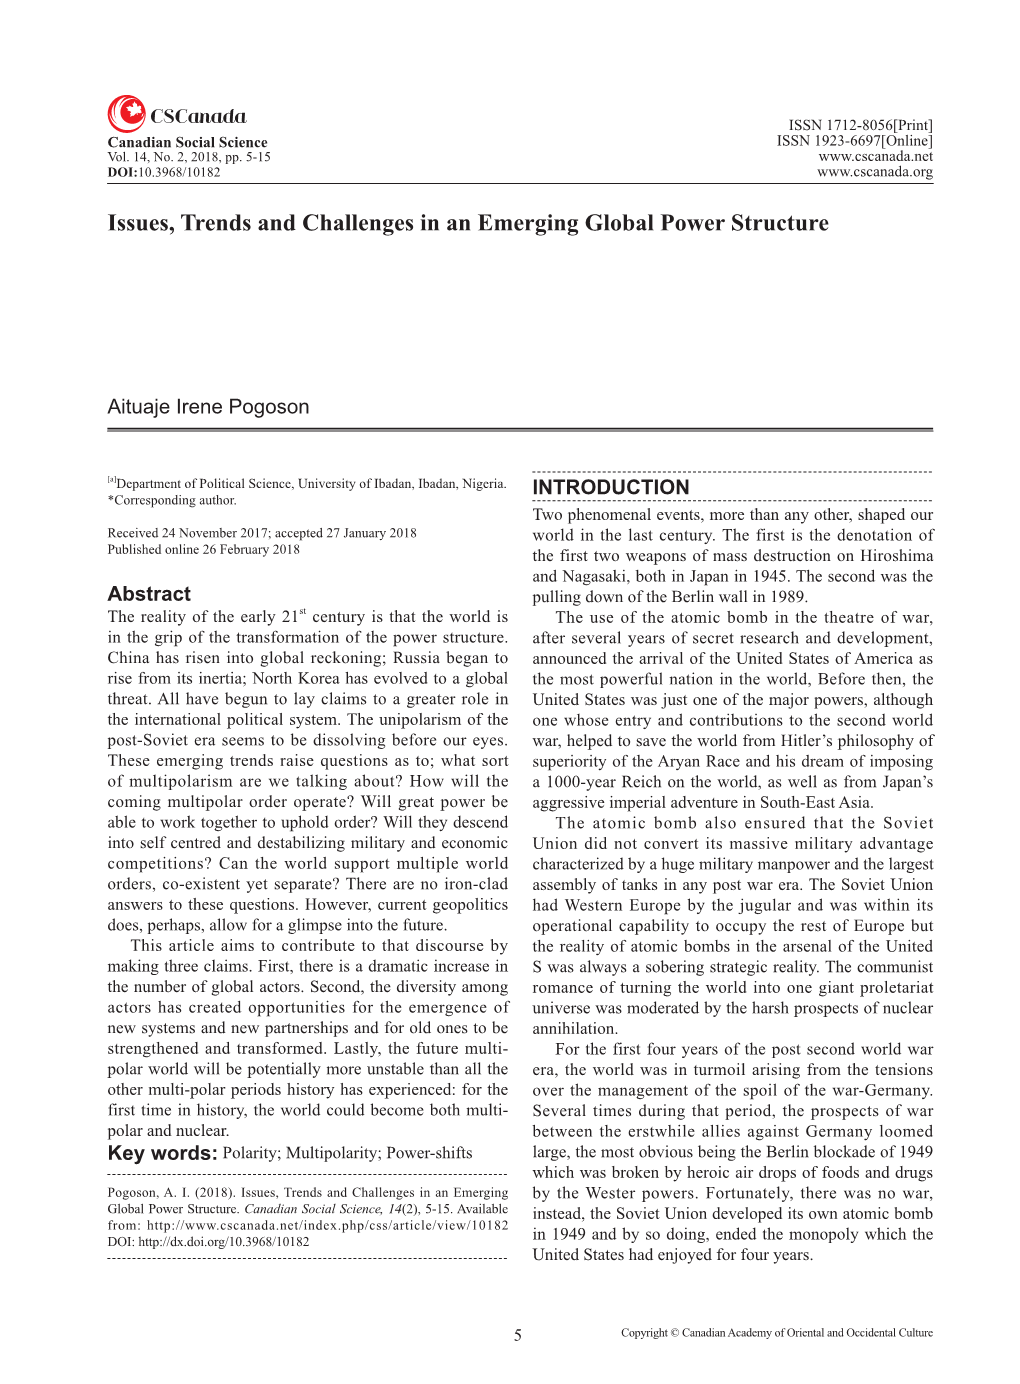 Issues, Trends and Challenges in an Emerging Global Power Structure